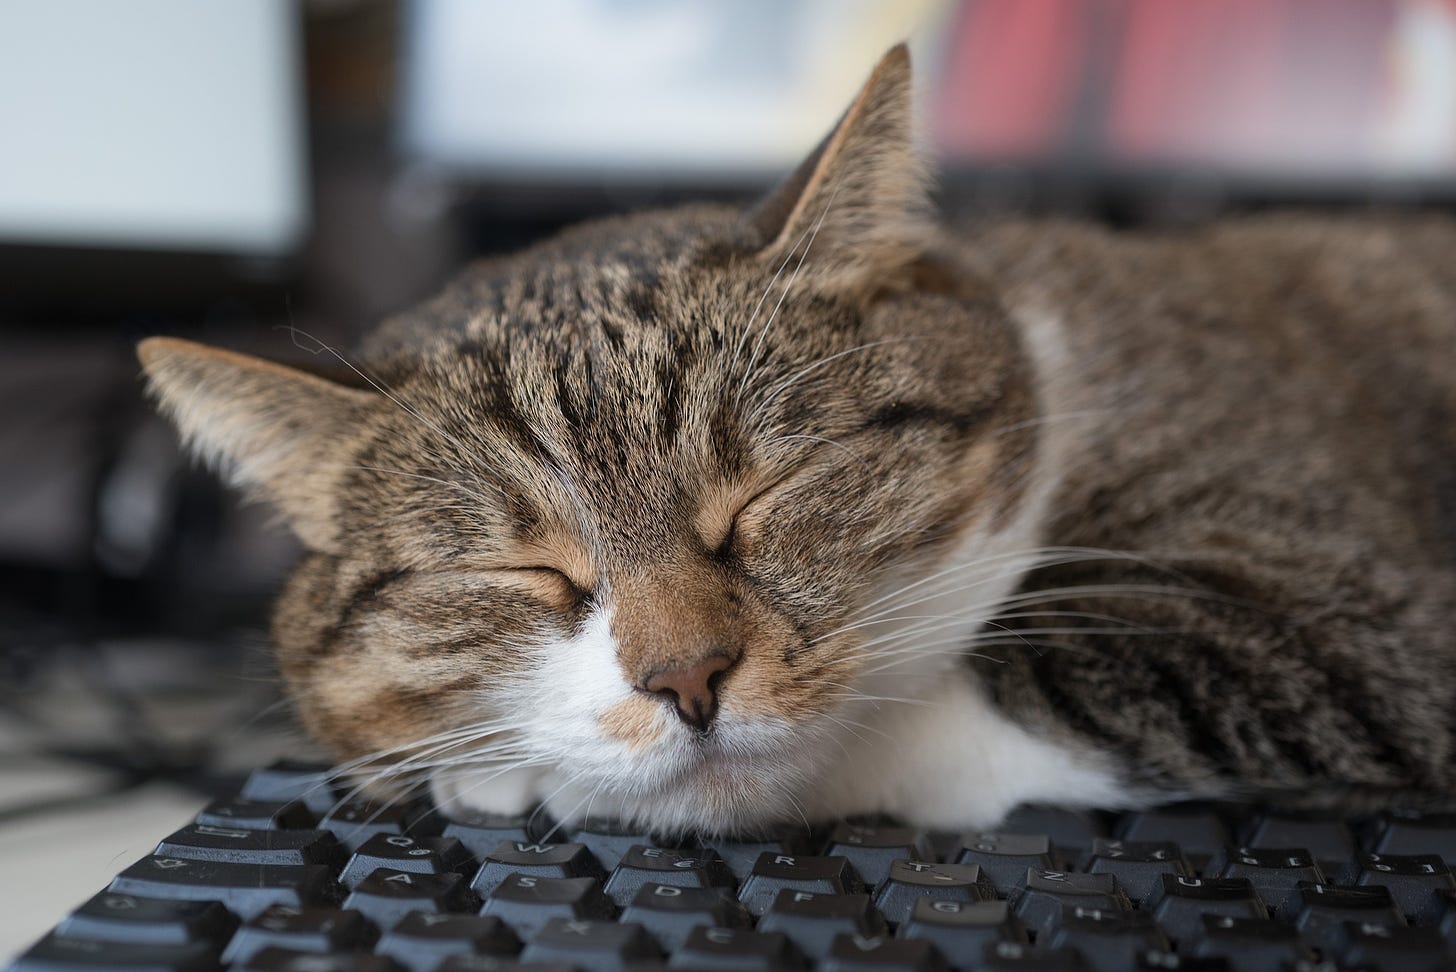 Cat On Your Keyboard? Here's Why That's Such a tempting Spot | PawTracks